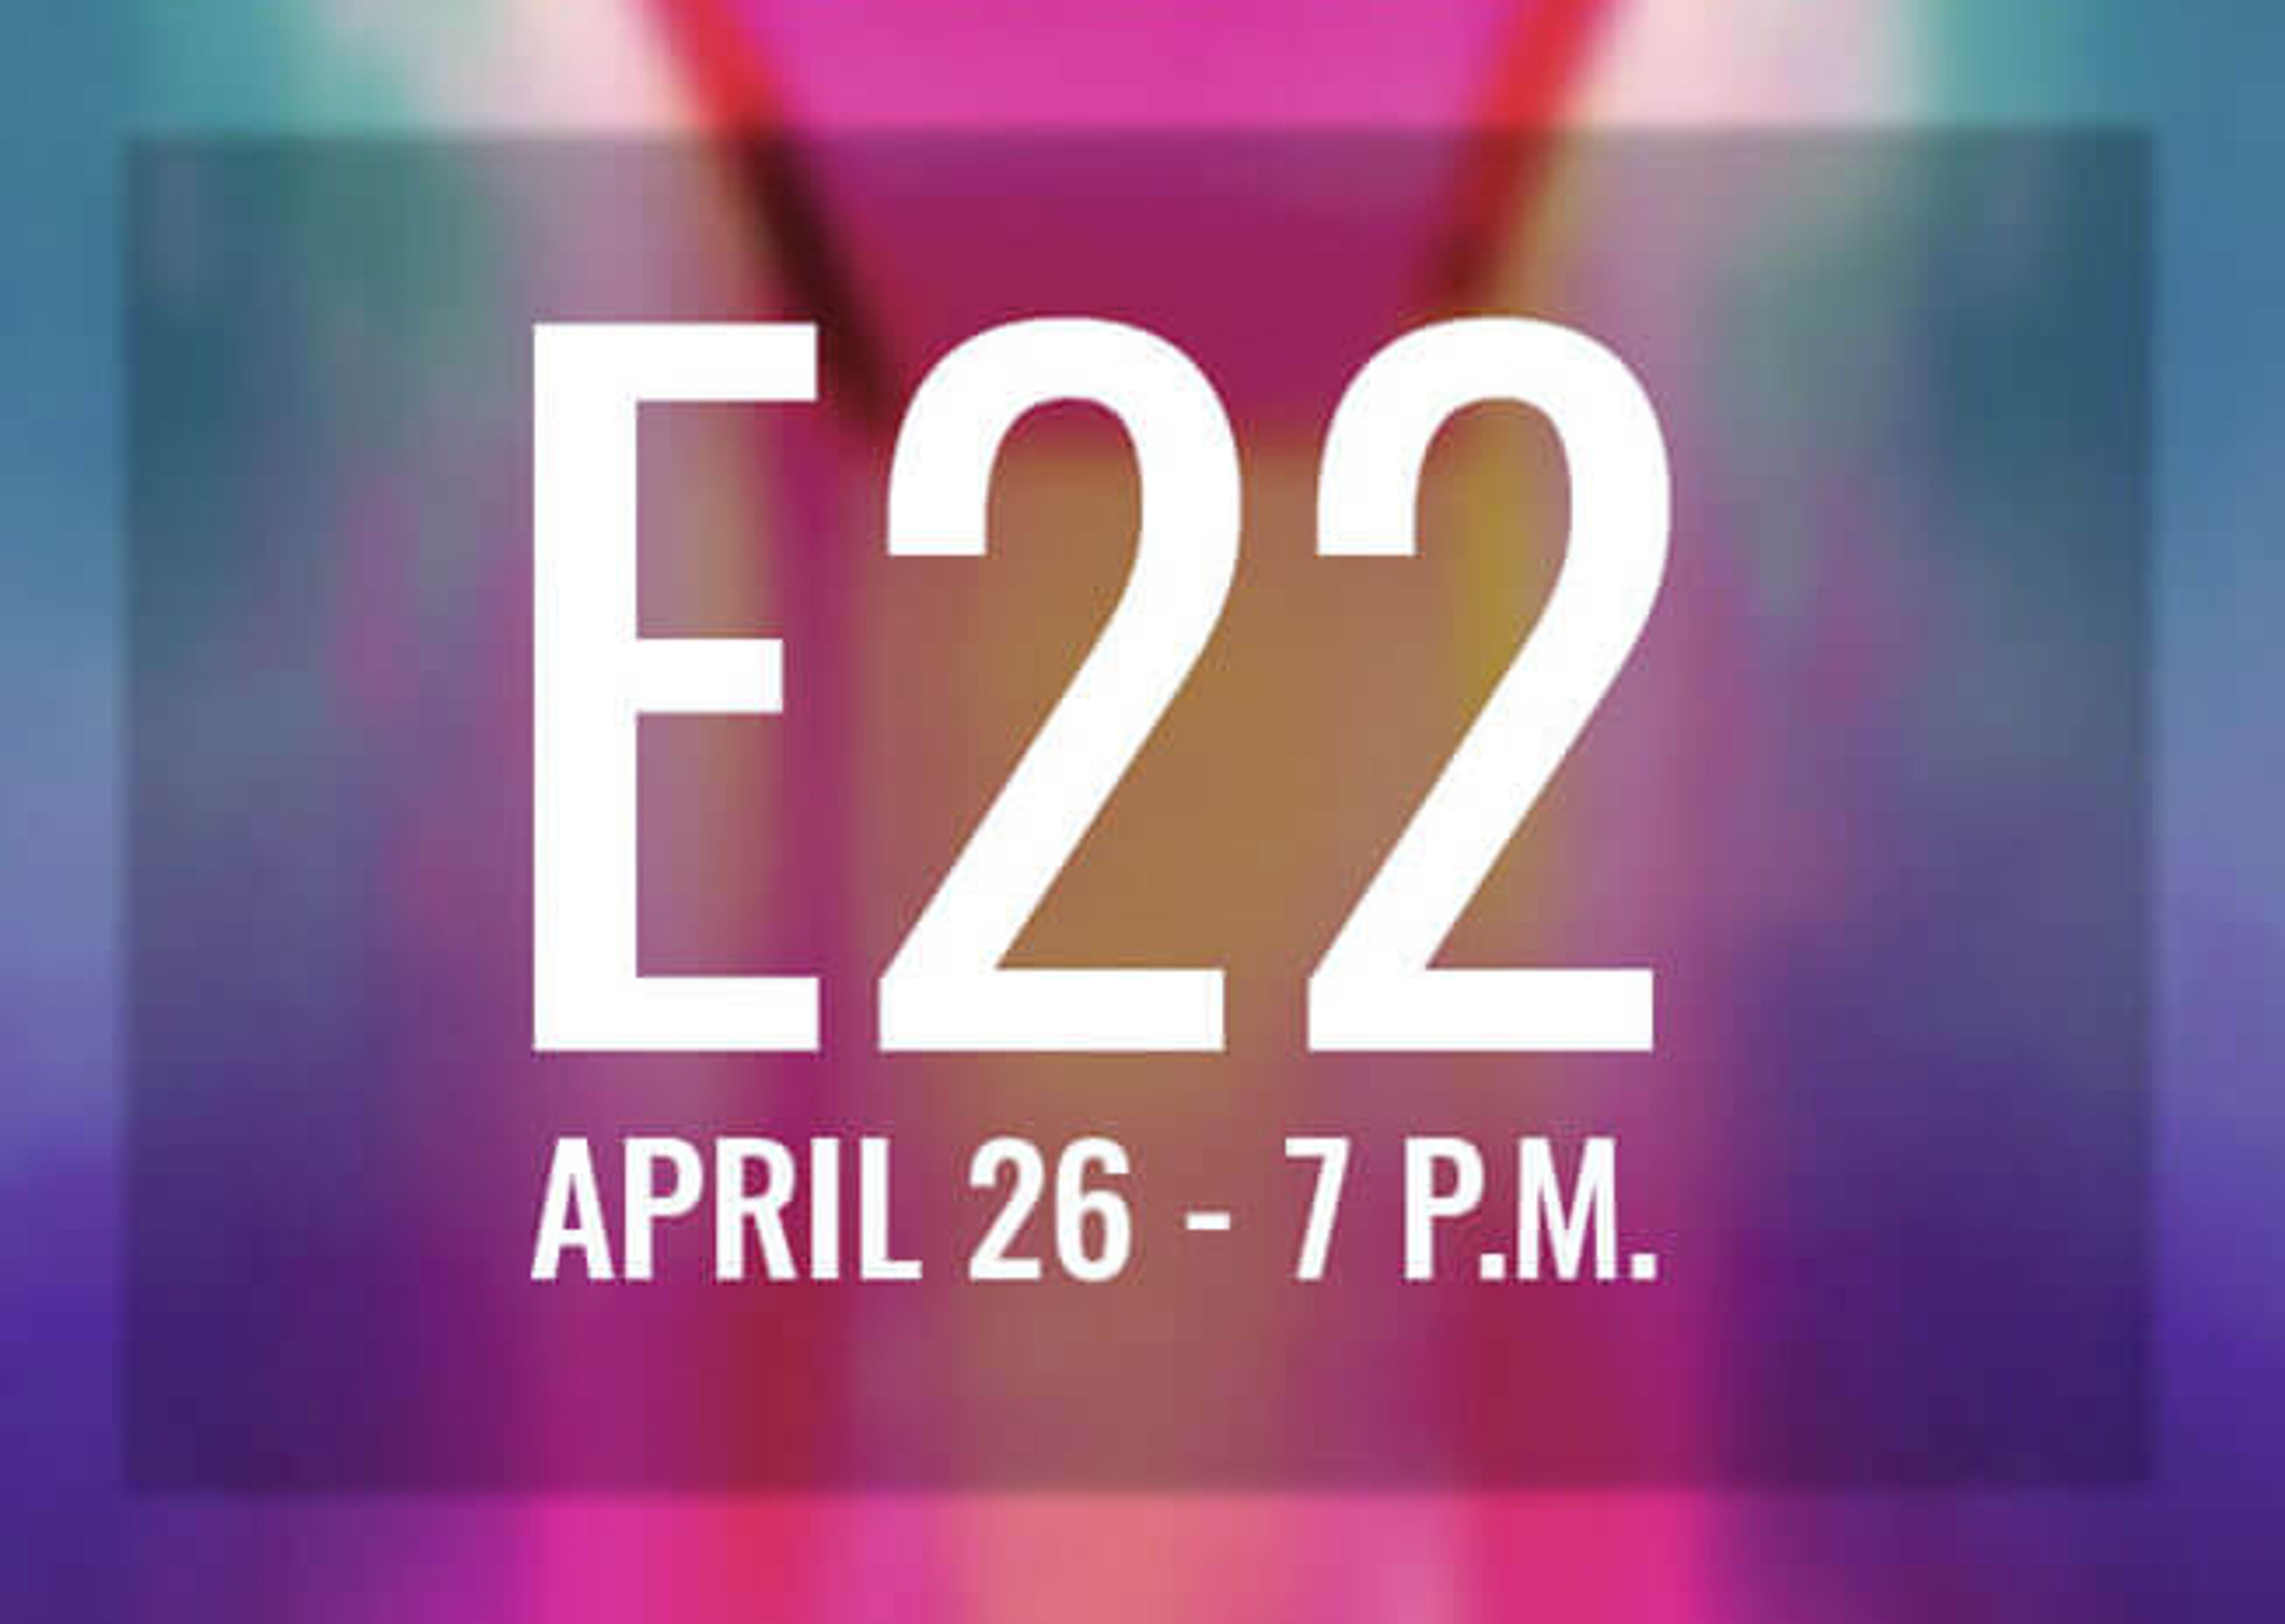 A colorful poster with large text 'E22' and details 'April 26 - 7 P.M.'